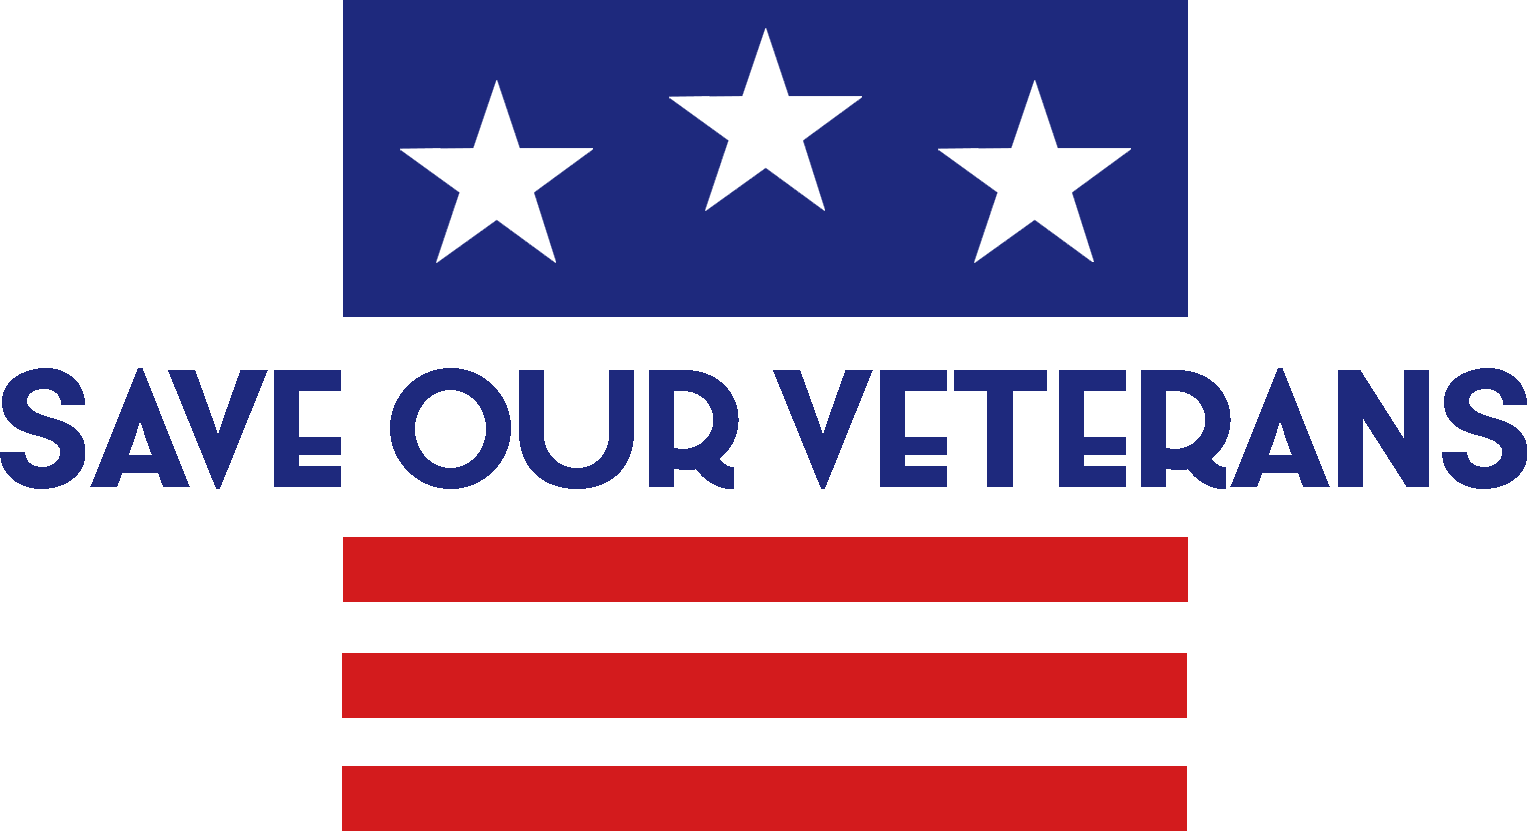 Save Our Veterans logo